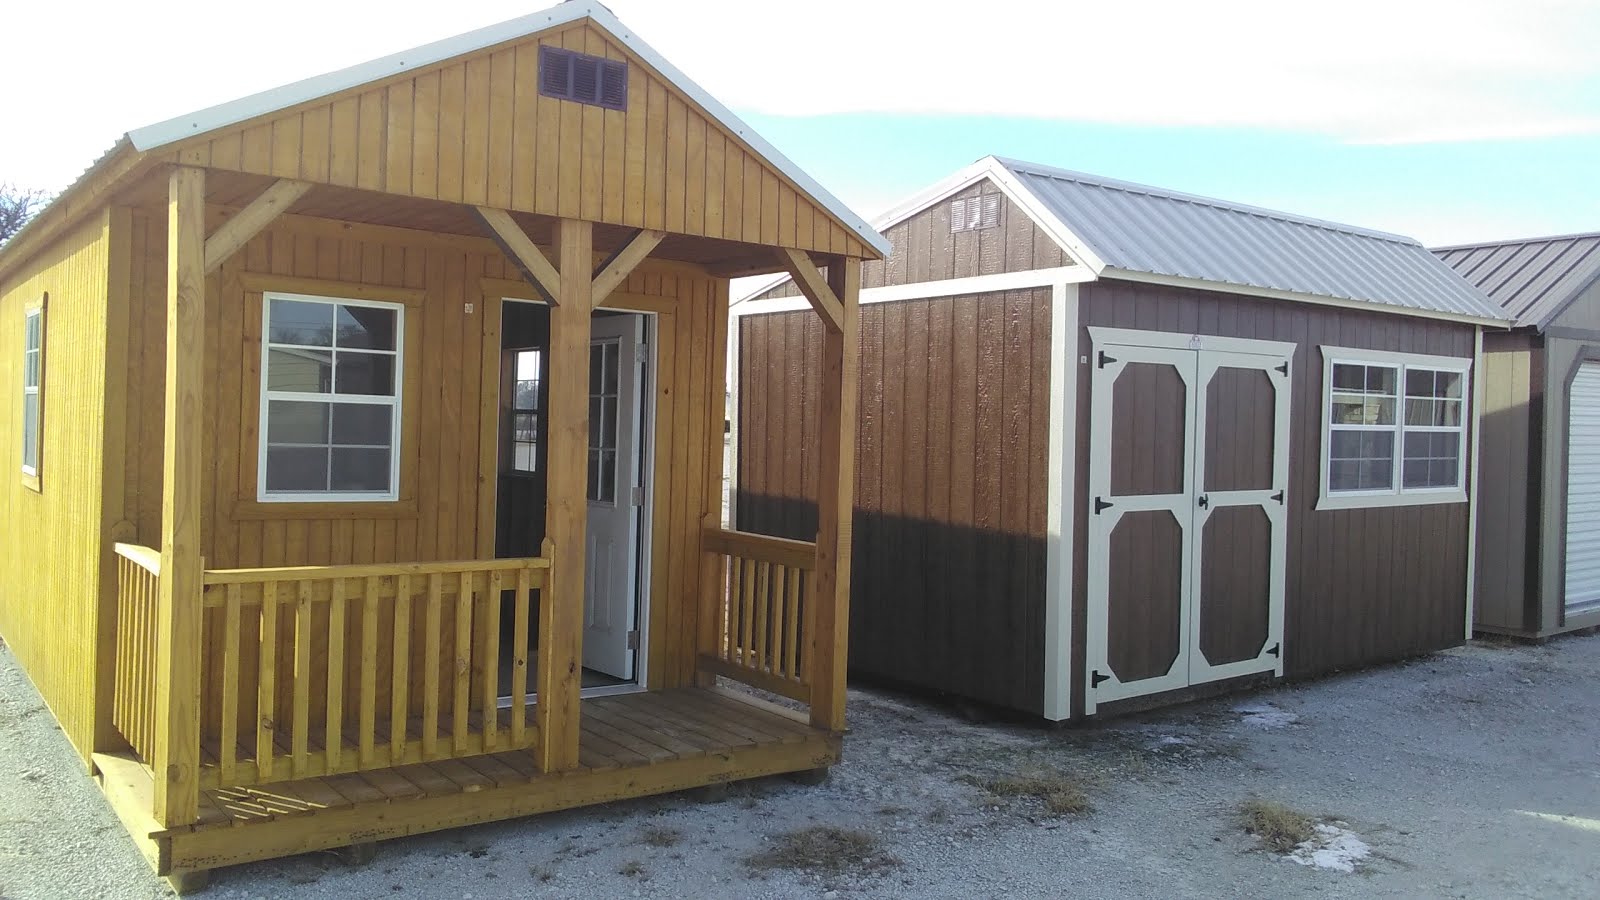 Prices for sheds etc.- including terms for RTO (Rent to Own) posted in all buildings on our lot.